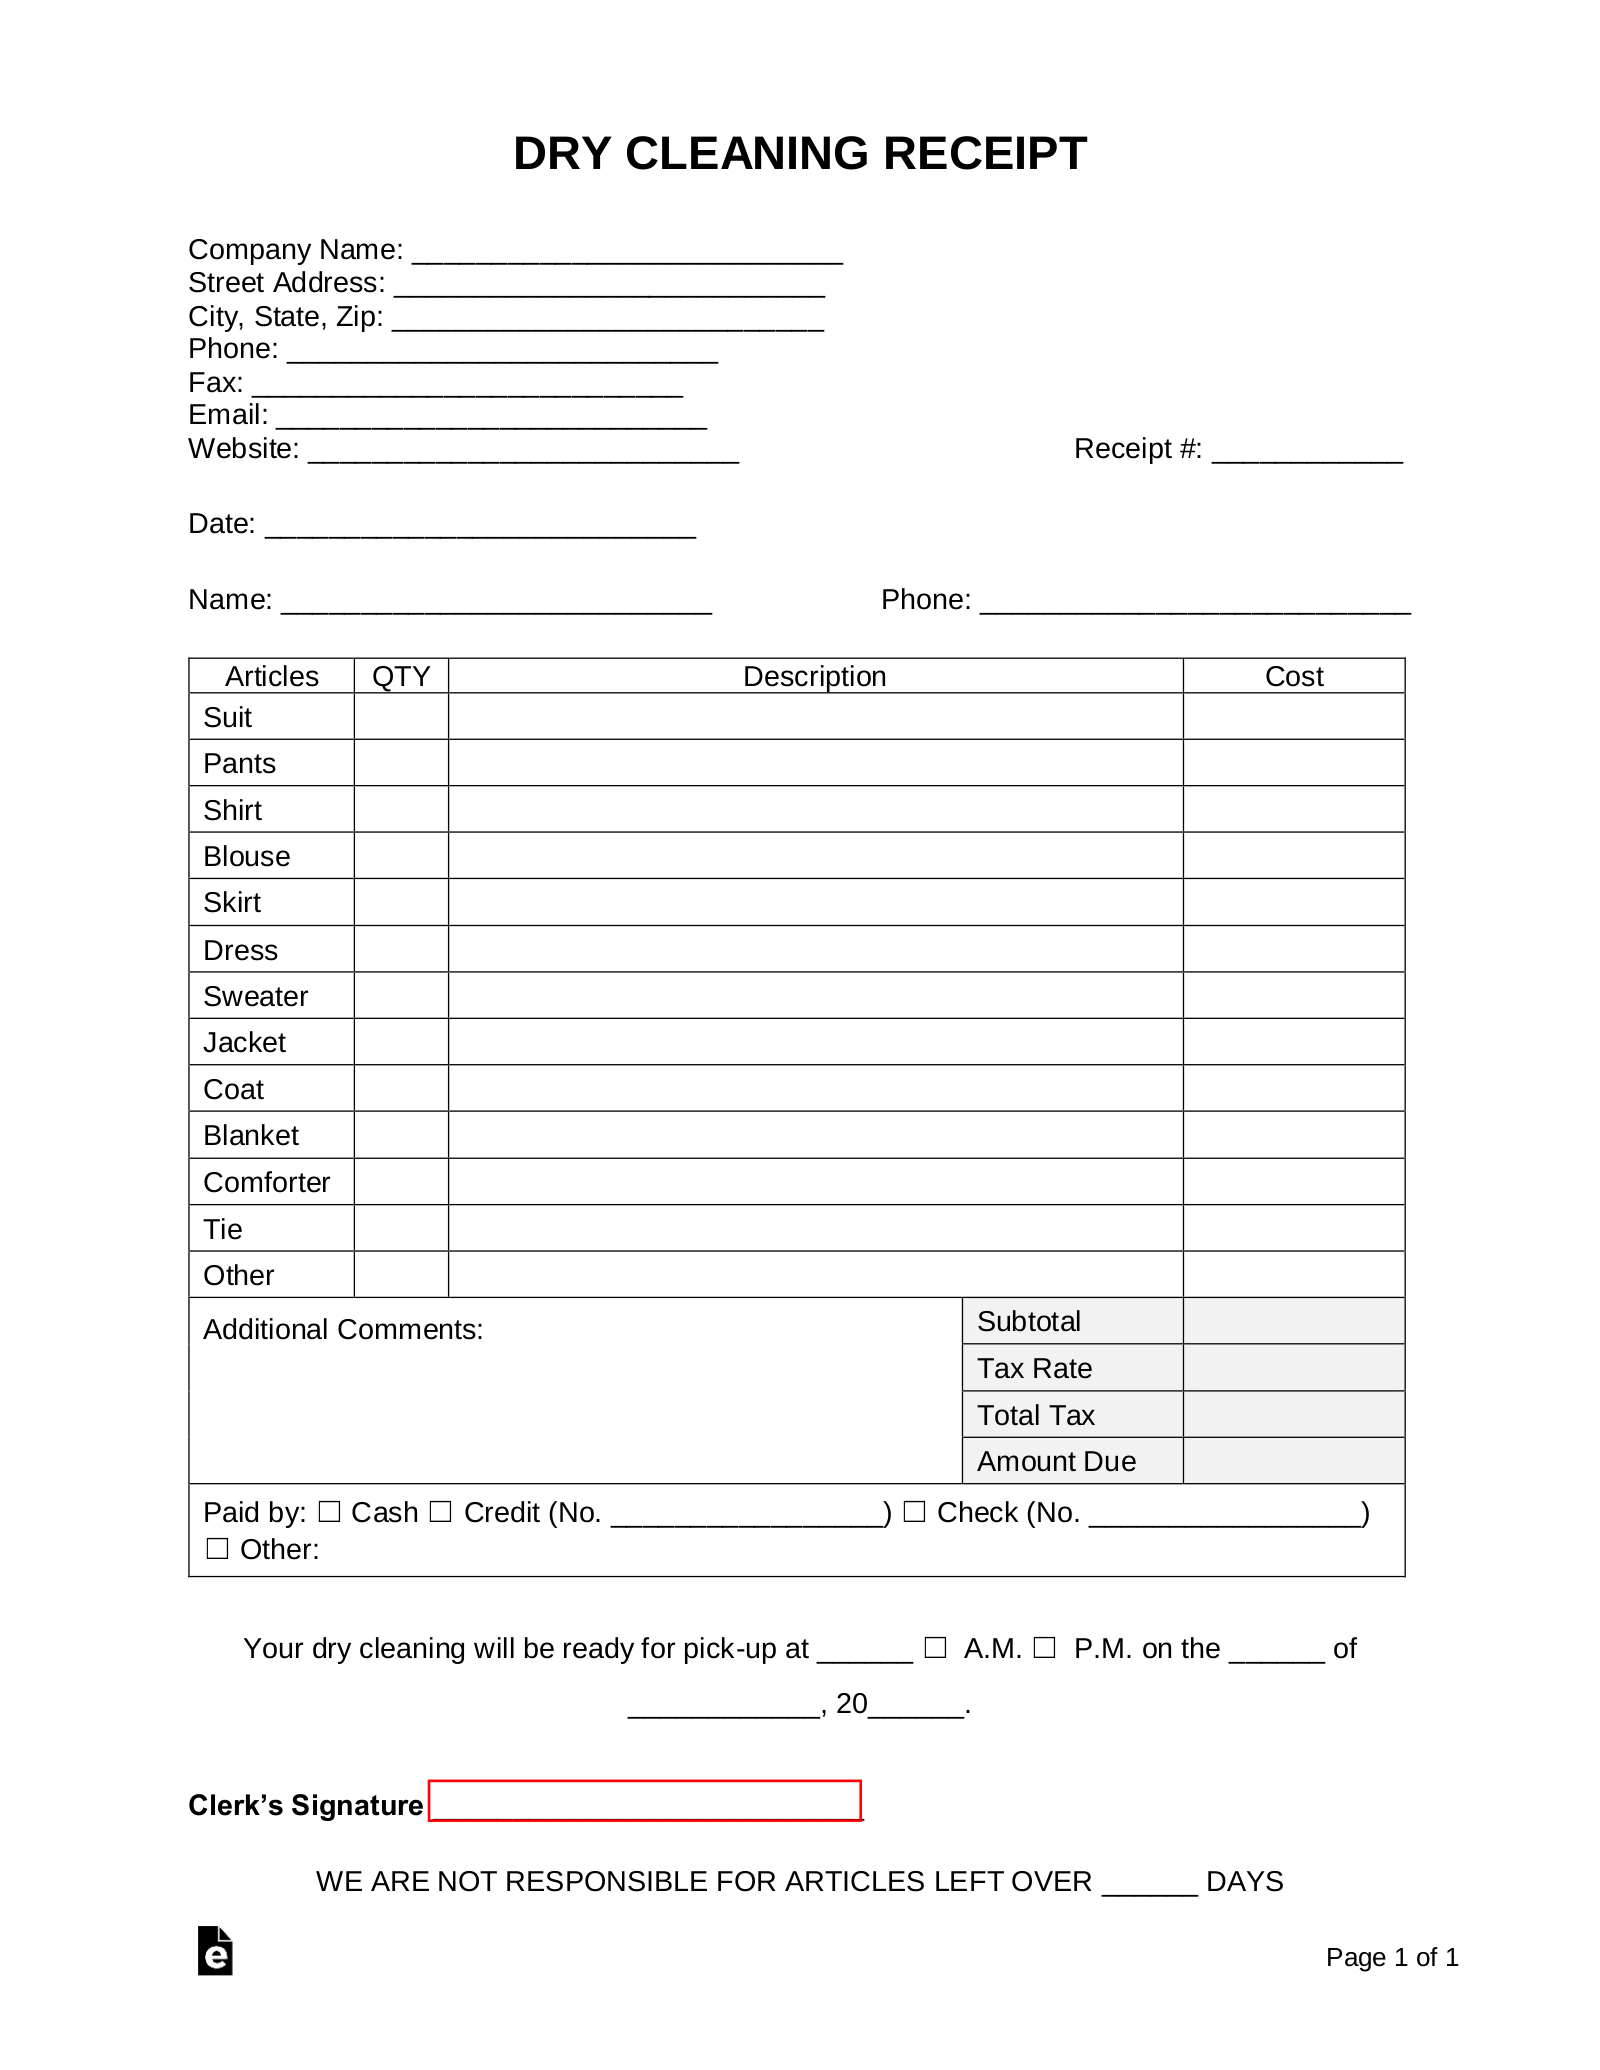 free-dry-cleaning-receipt-template-pdf-word-eforms